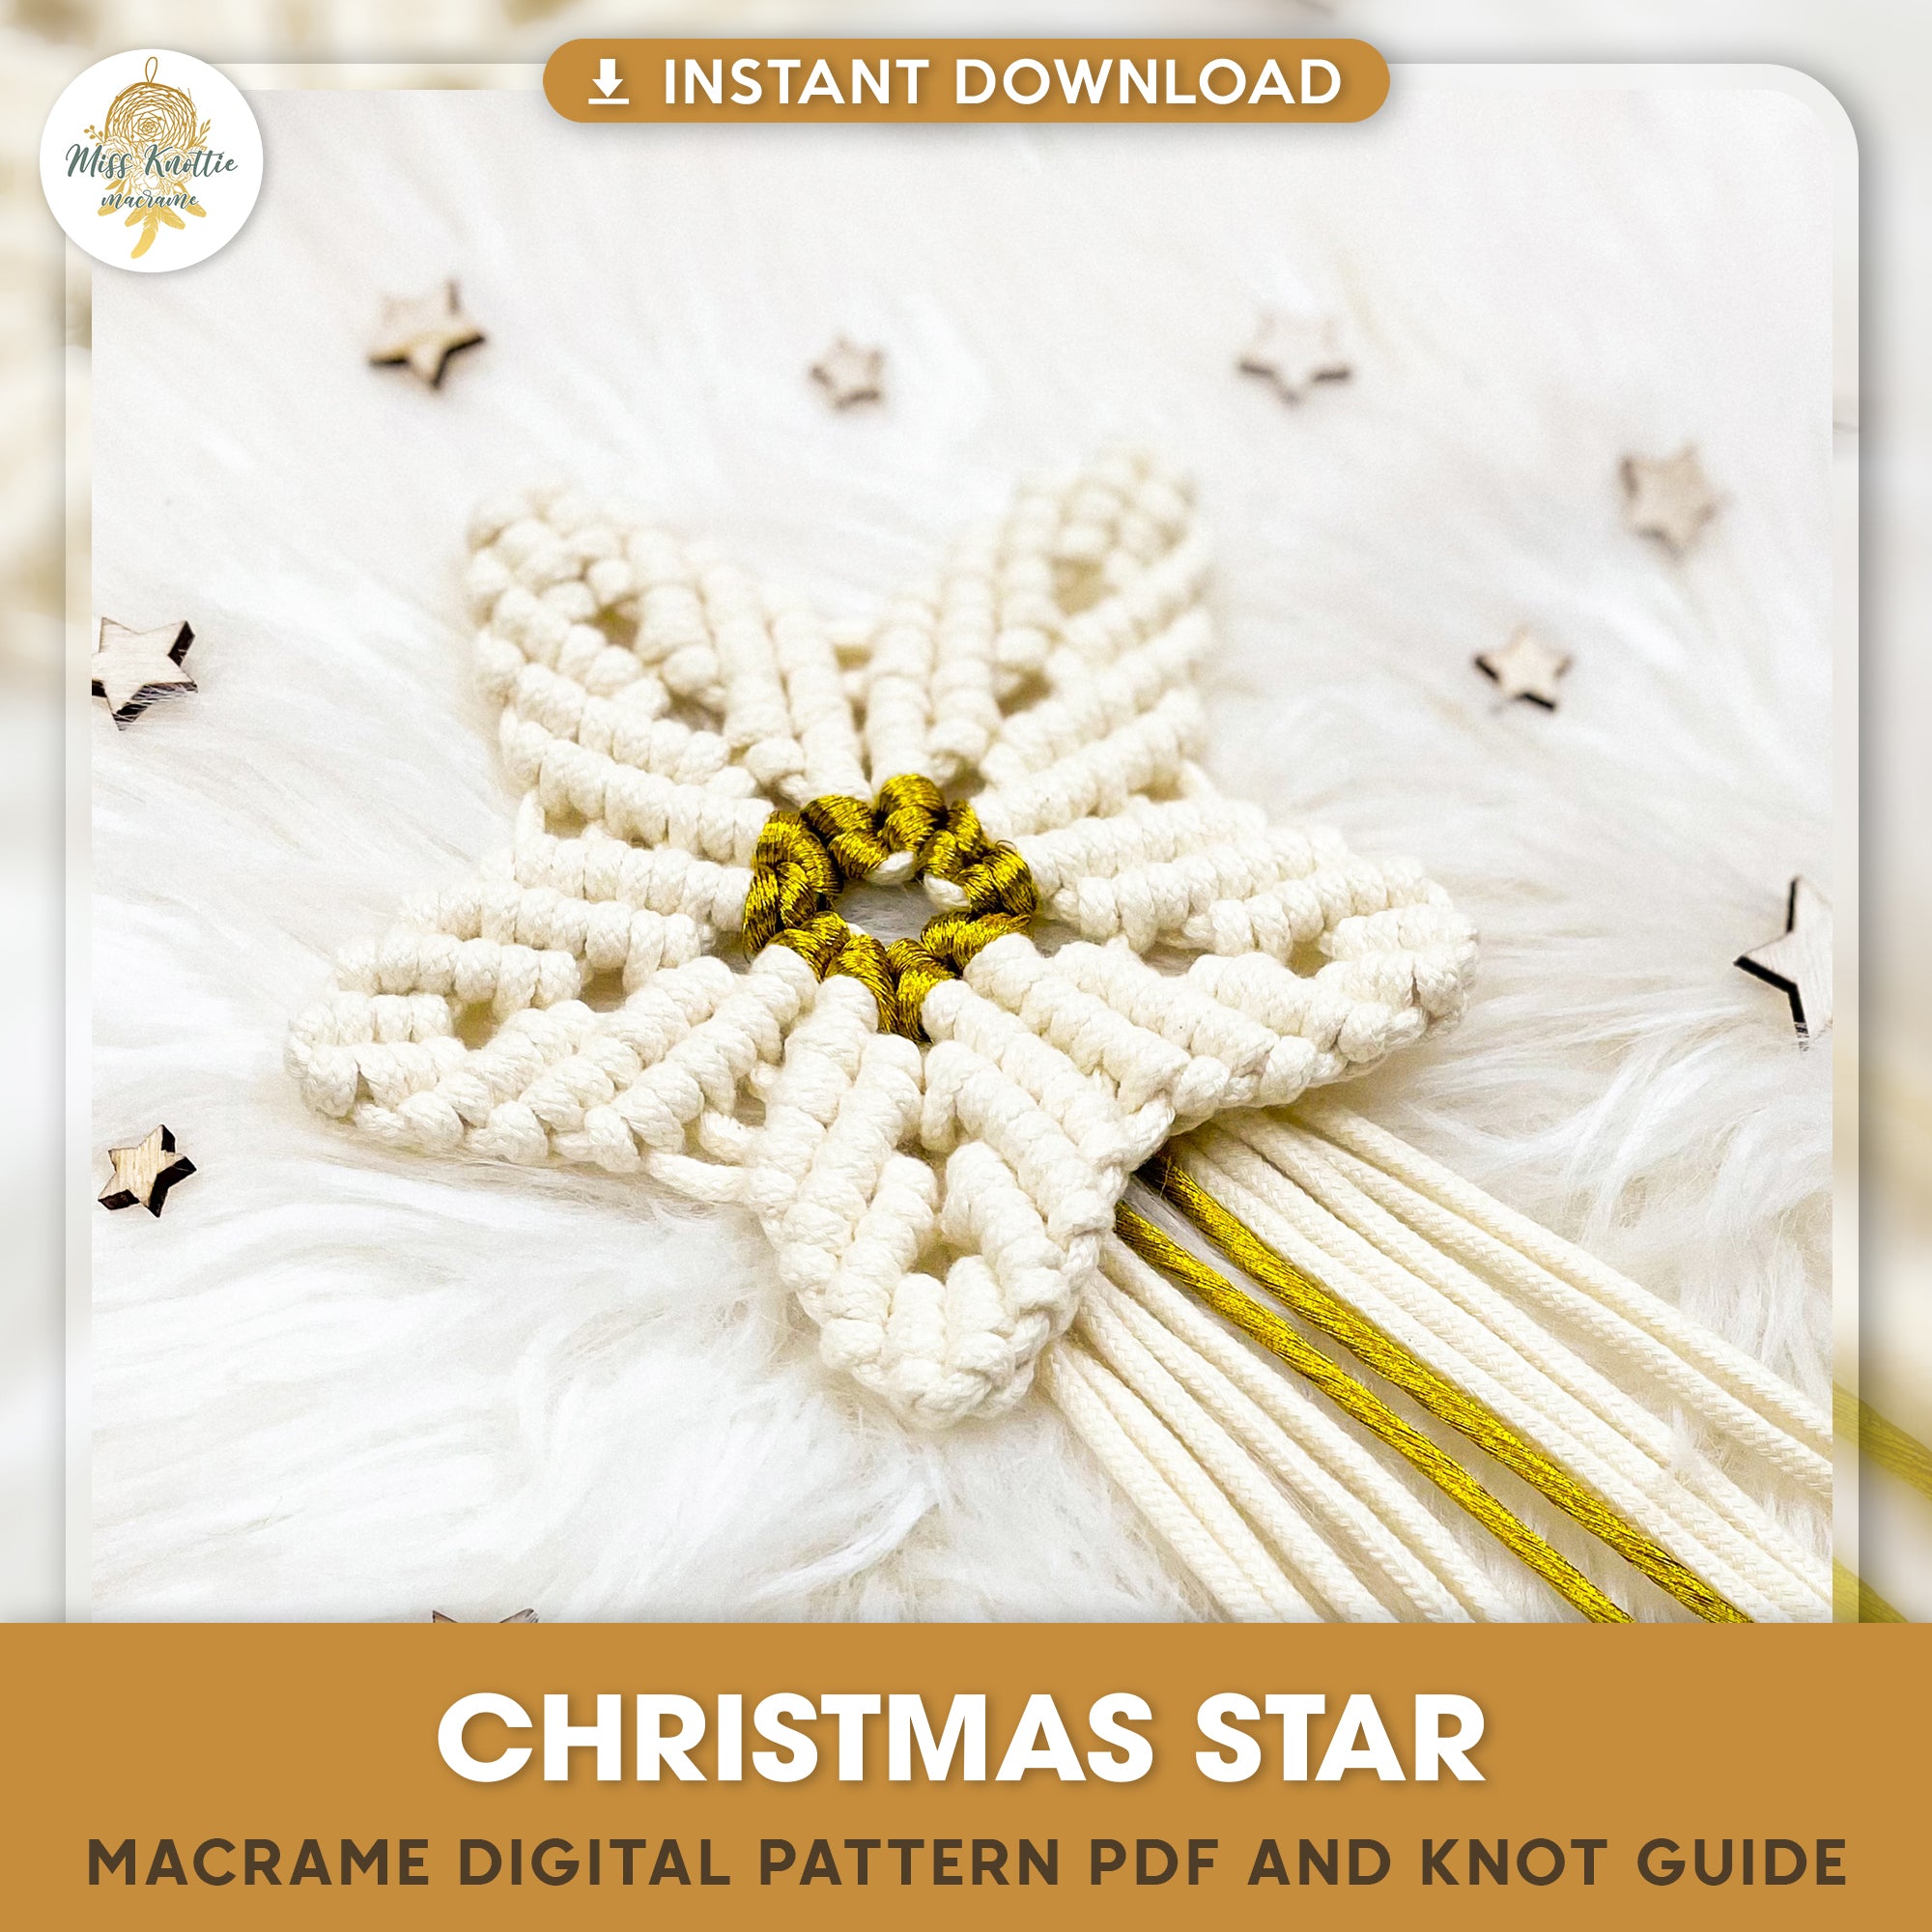 Christmas Star - Digital PDF and Knot Guide